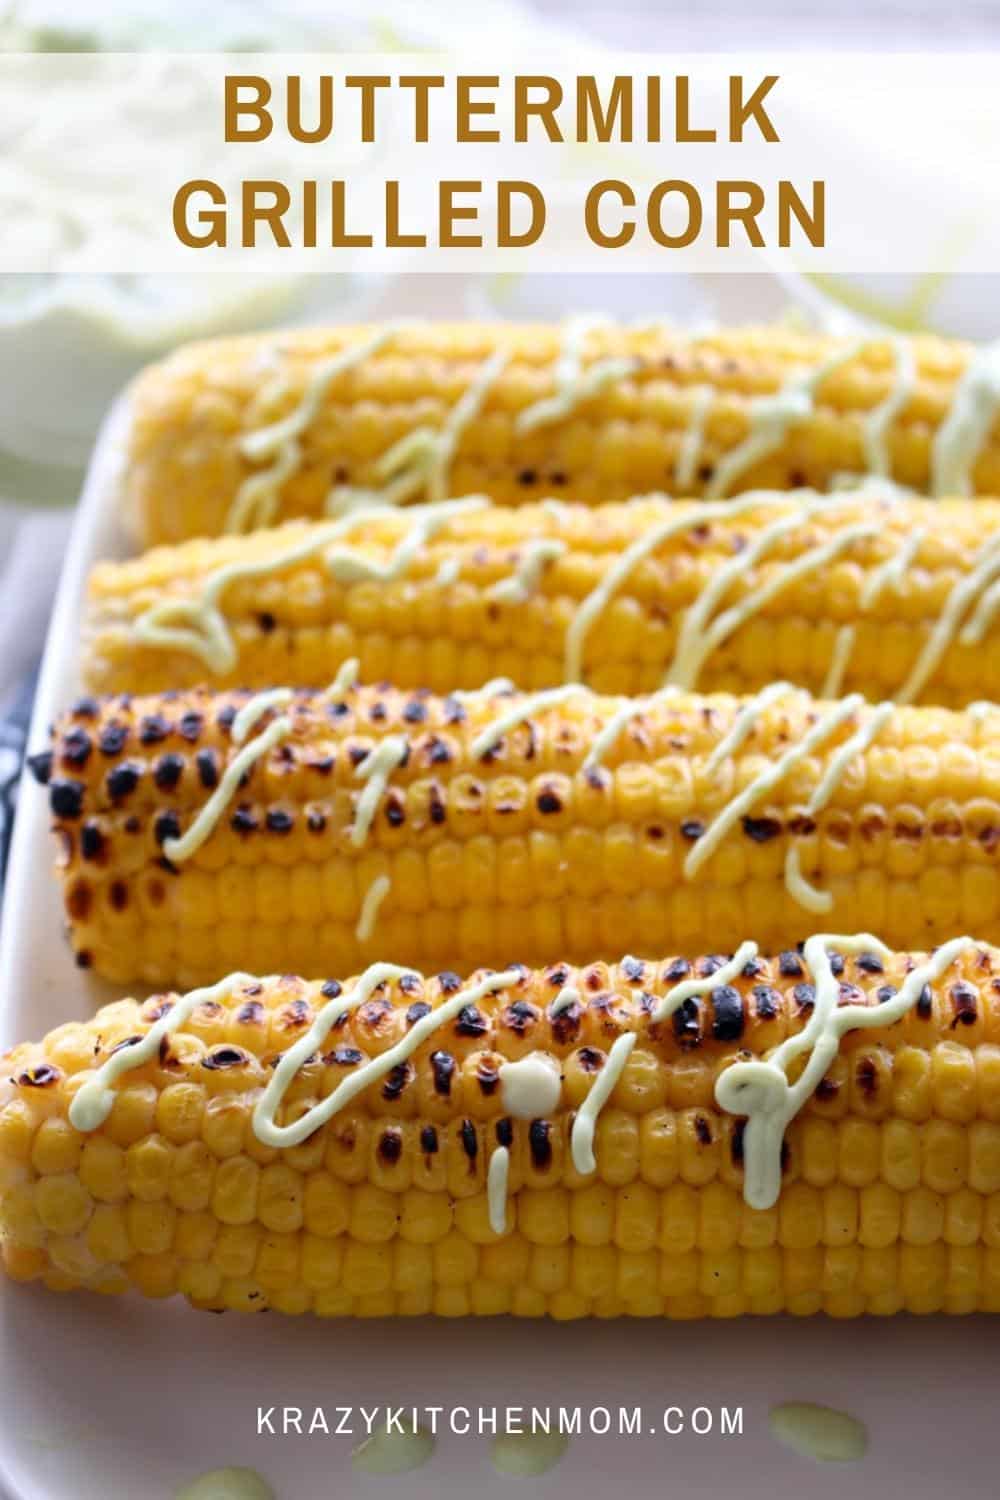 There is nothing better than summertime grilled corn on the cob dripping in butter. Marinating it in buttermilk adds tangy sweetness. via @krazykitchenmom